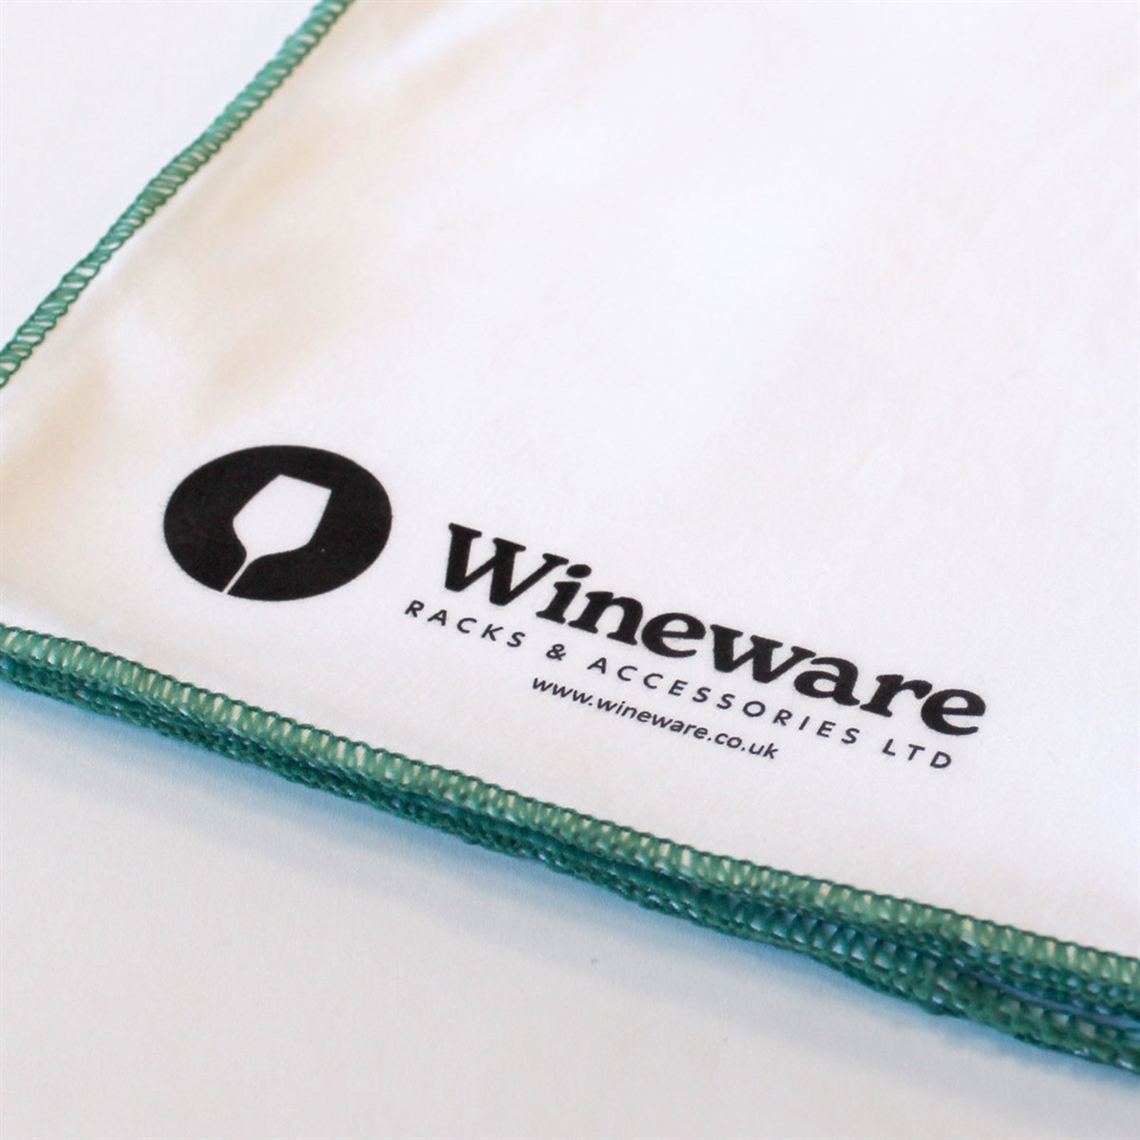 View more restaurant glasses - mark thomas from our Wine Glass Cleaning & Accessories range